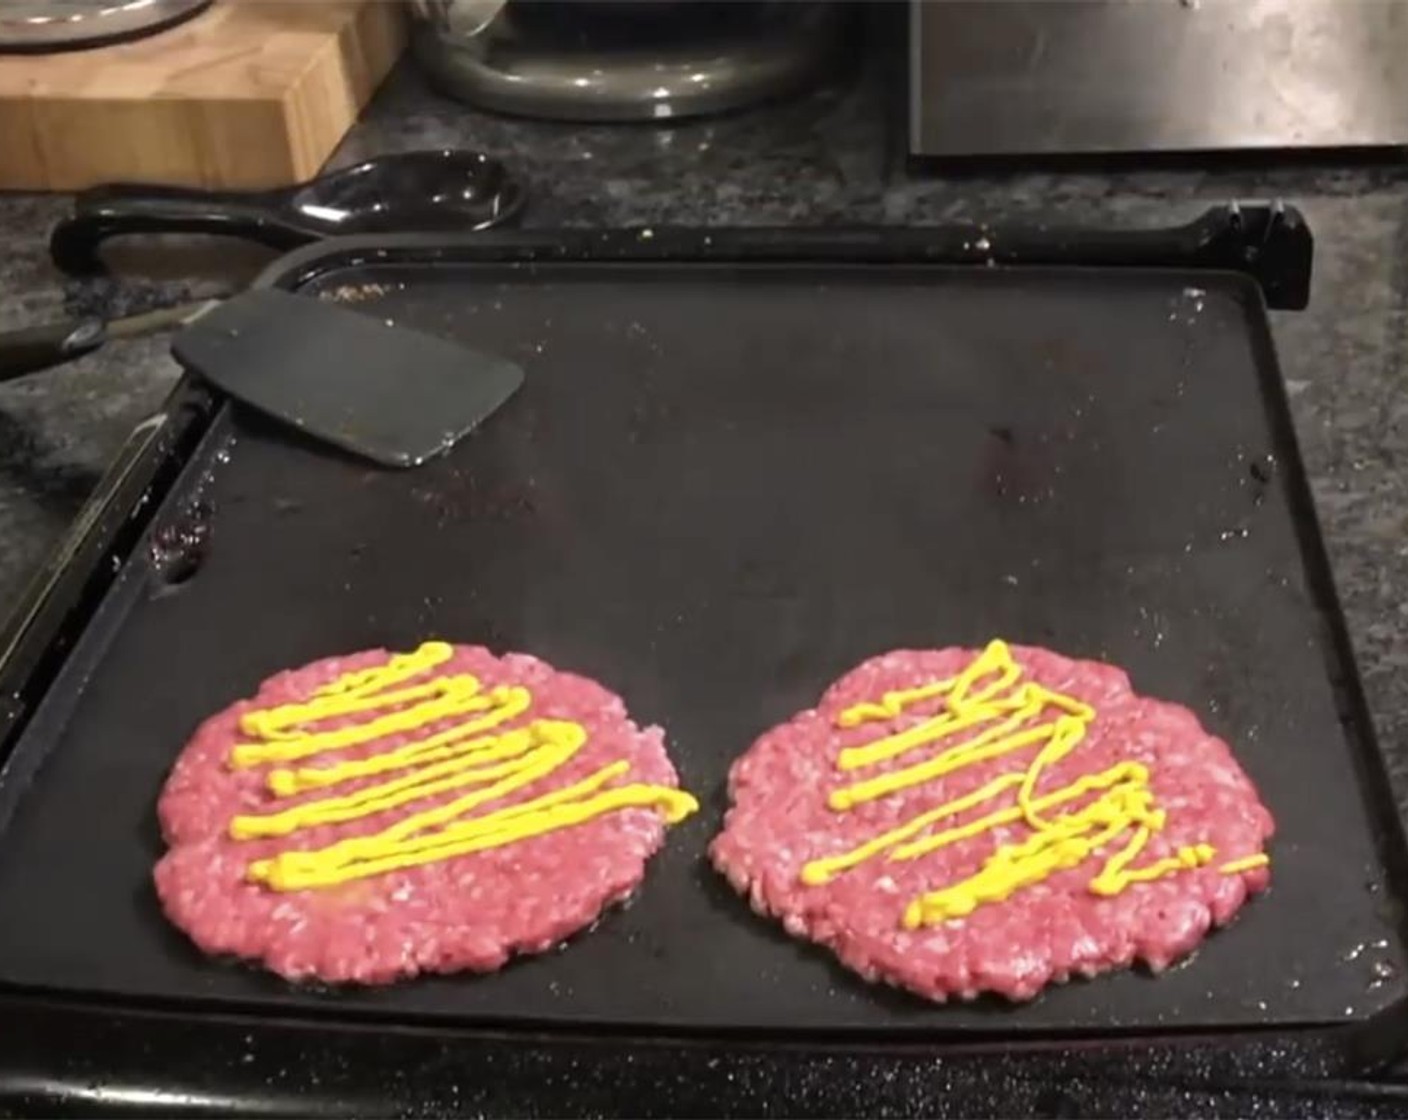 step 4 Place the patties on a hot grill or stove pan, add Yellow Mustard (to taste).